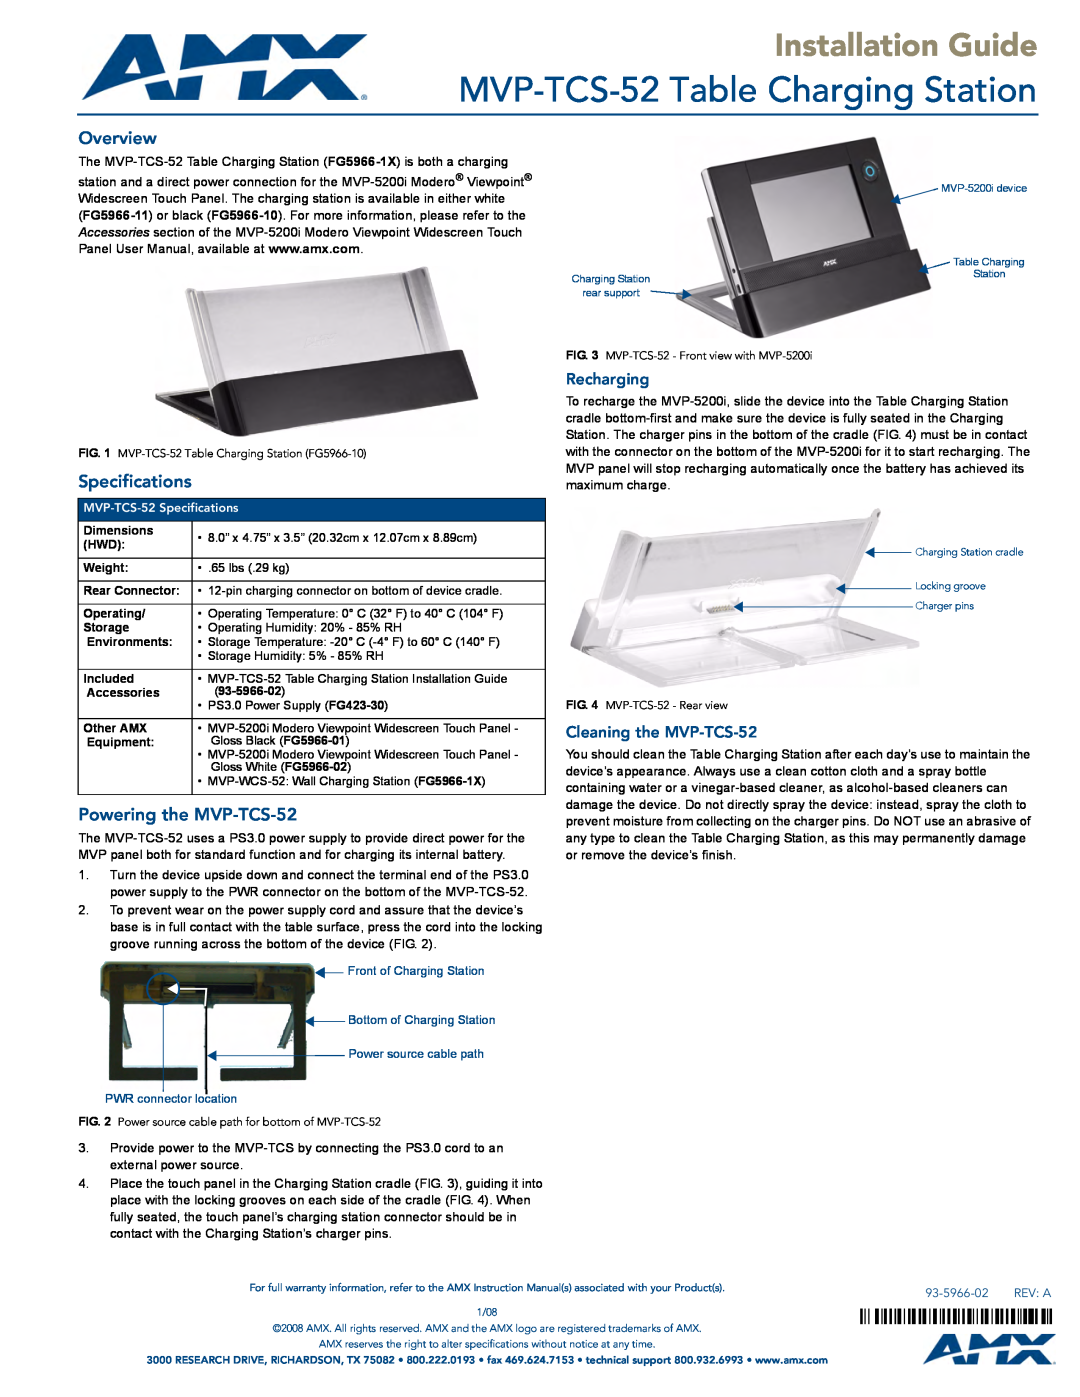 AMX specifications MVP-TCS-52 Table Charging Station, Installation Guide, Overview, Specifications, Recharging 